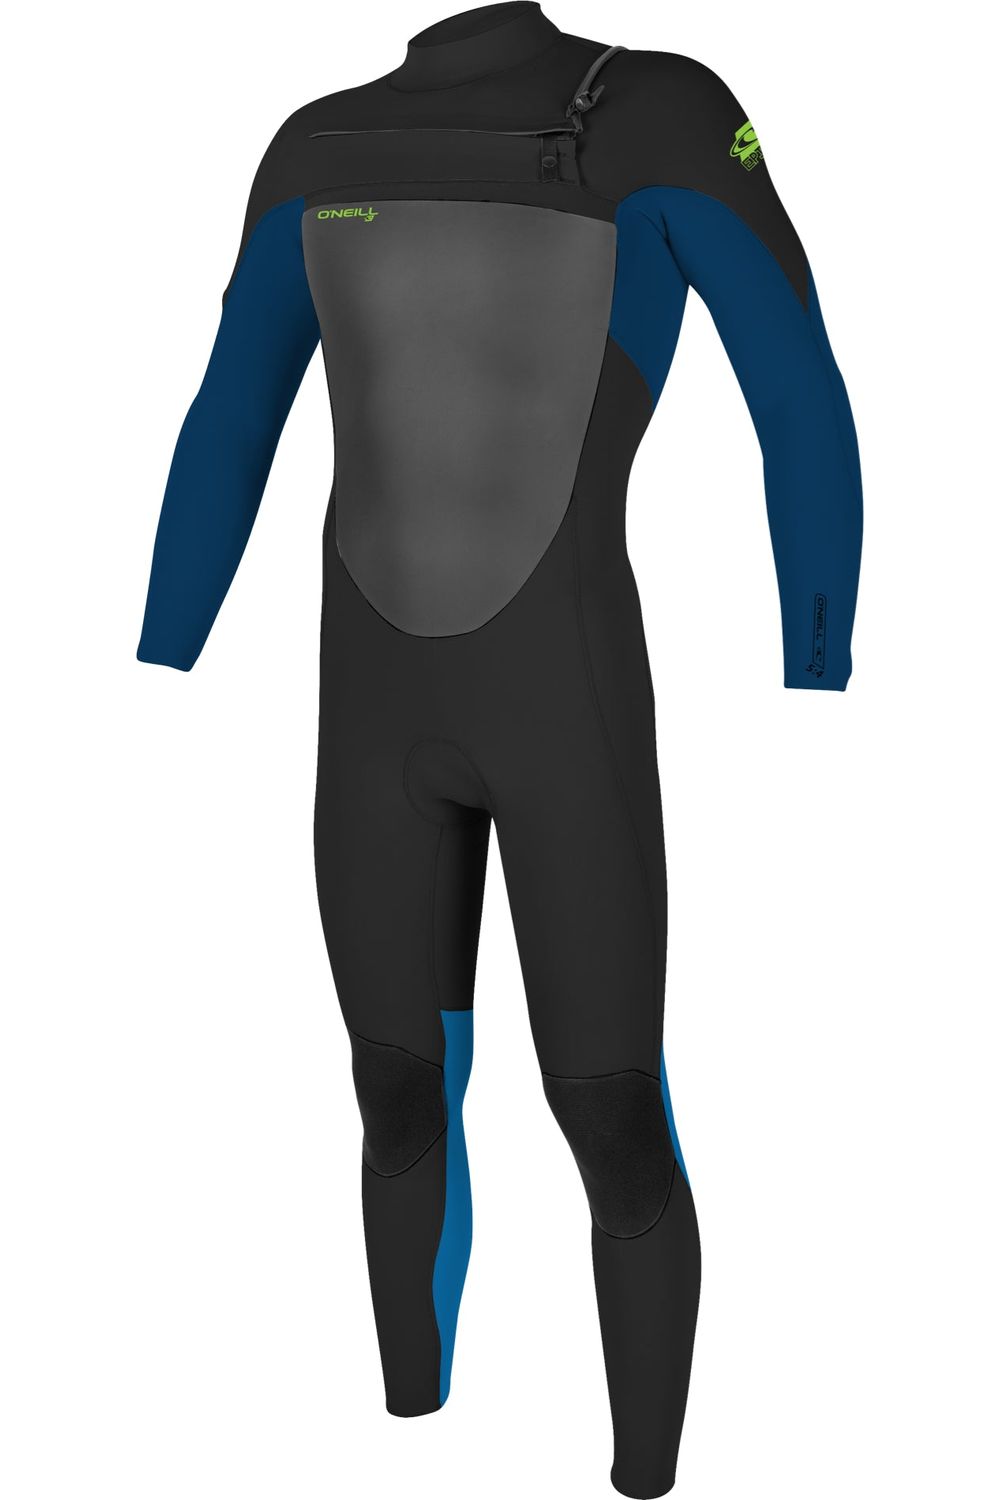 O'Neill Epic Youth Wetsuit 5/4 With Chest Zip In Black & Blue